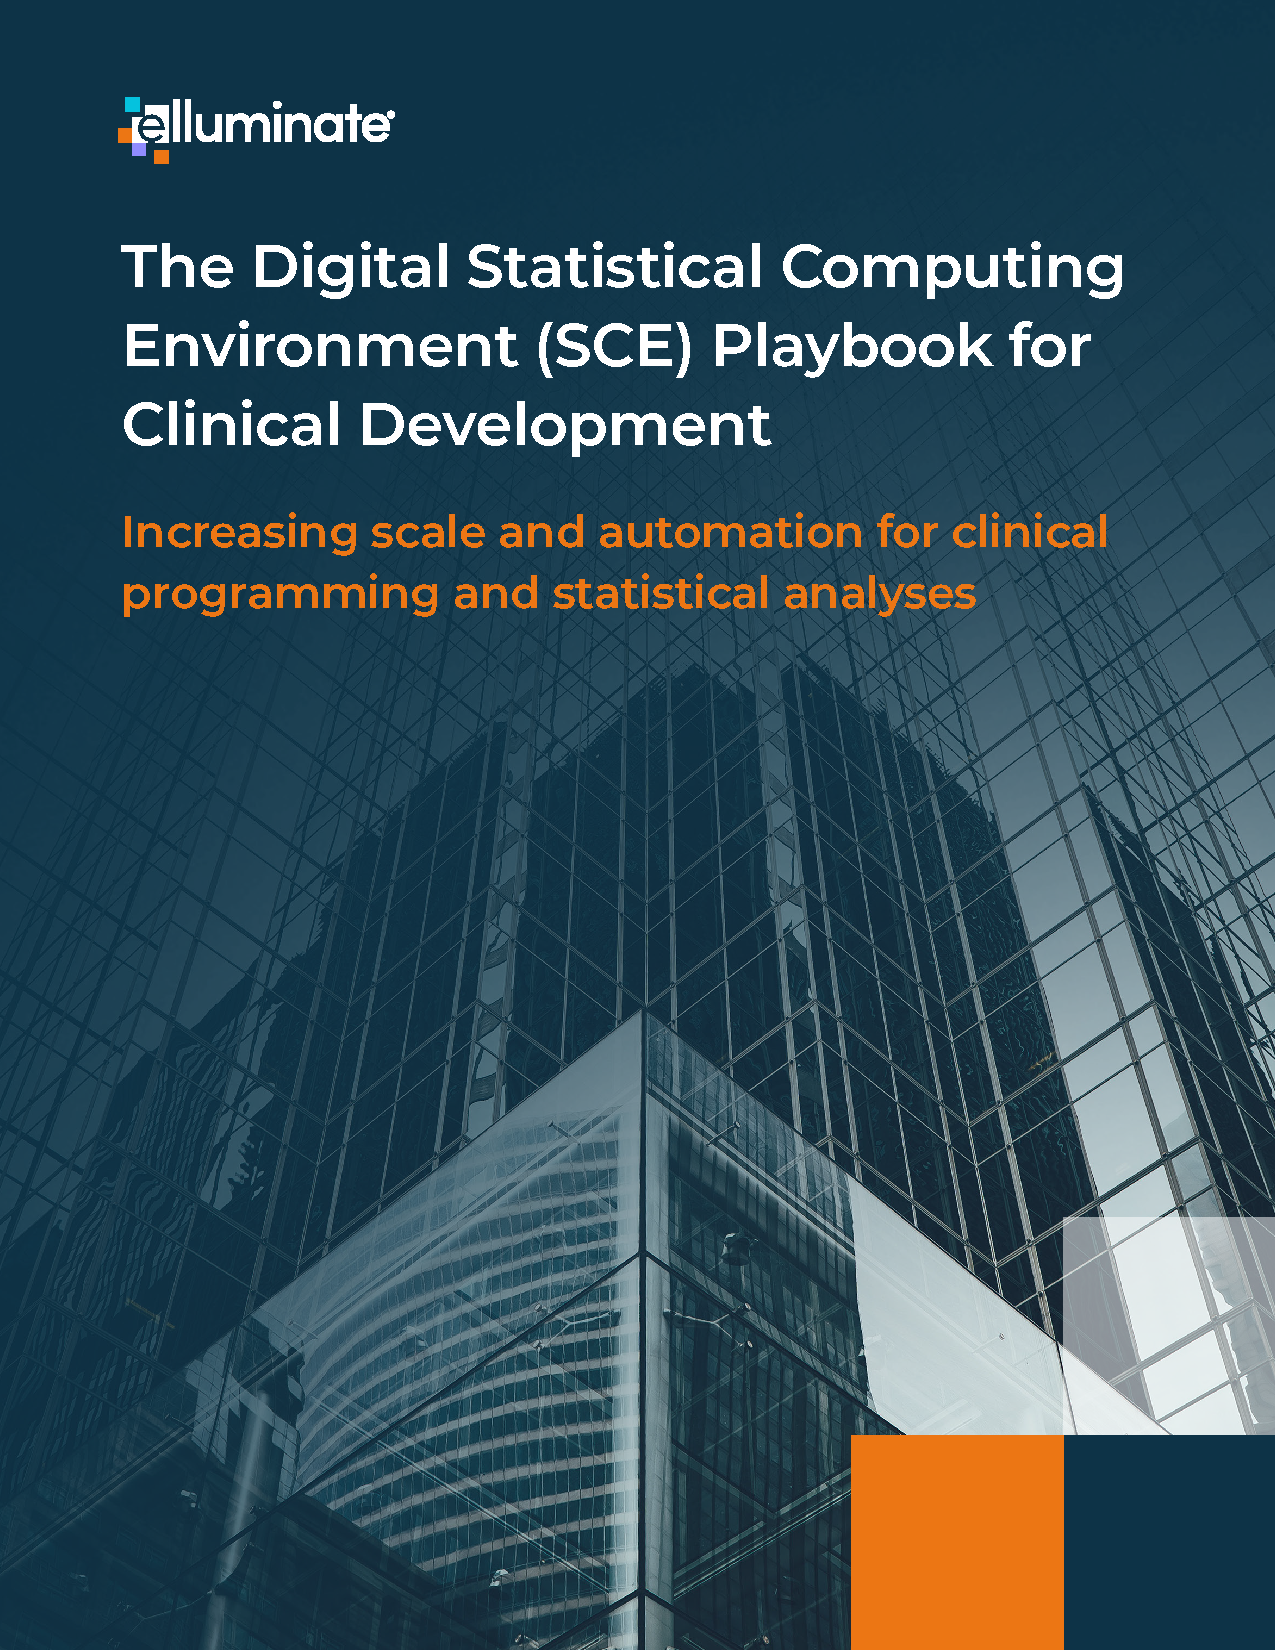 The Digital Statistical Computing Environment (SCE) Playbook for Clinical Development